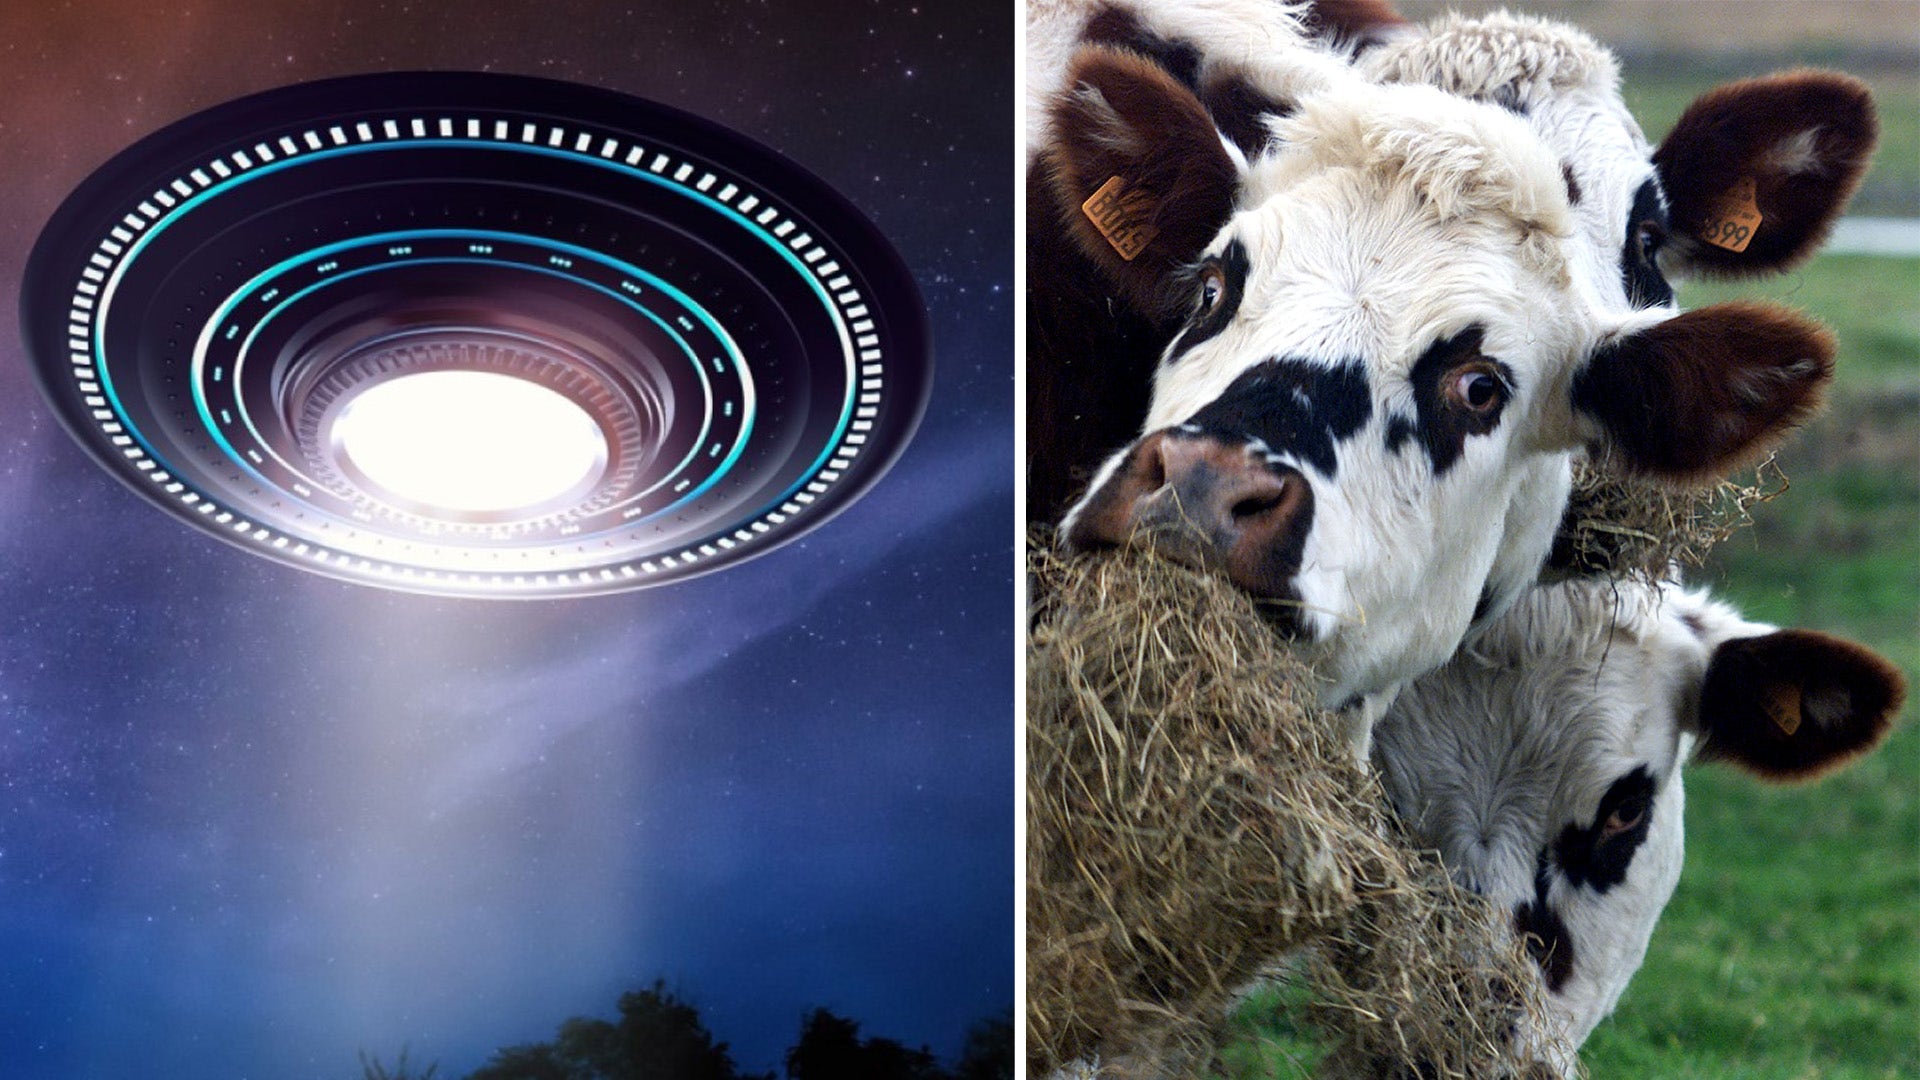 Mysterious deaths of six cattle in Texas sparks UFO fears: 'Something strange' is happening